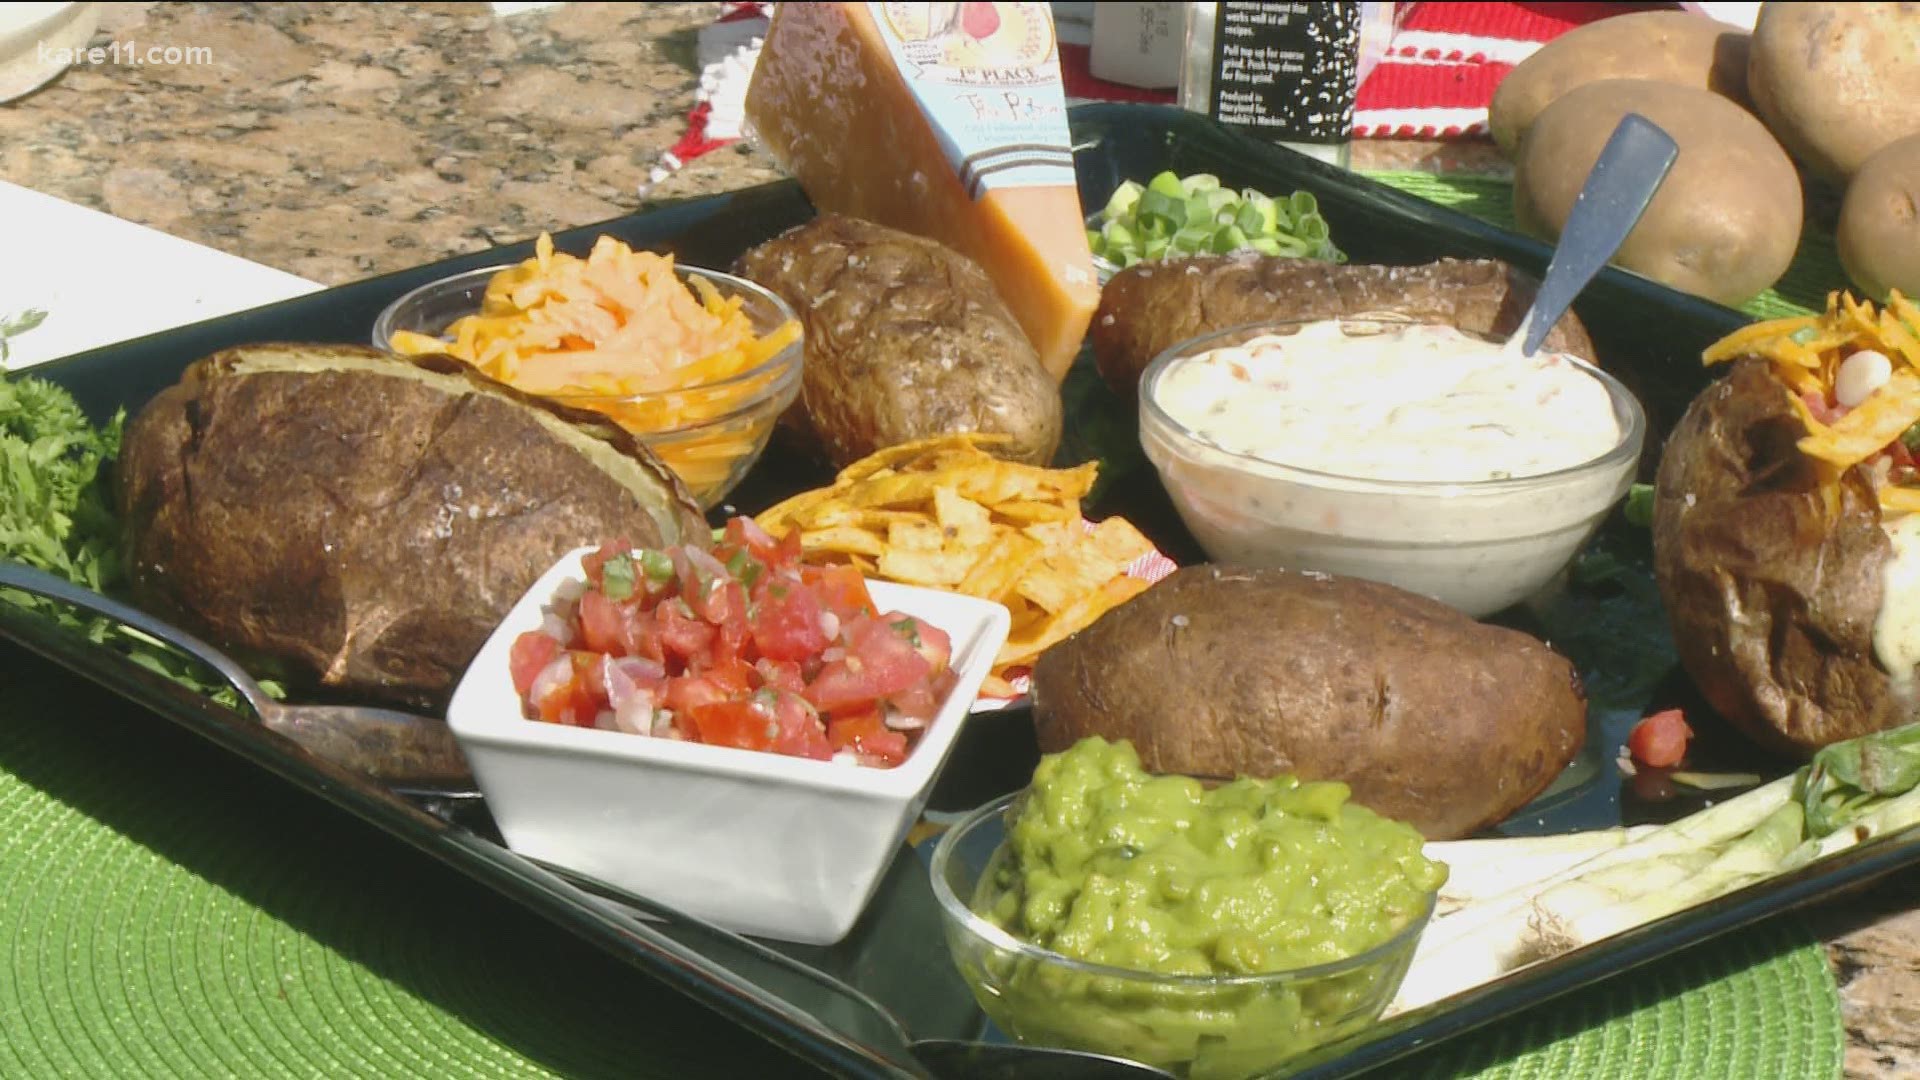 Kowalski's shows us a delicious side dish for your steaks this summer.